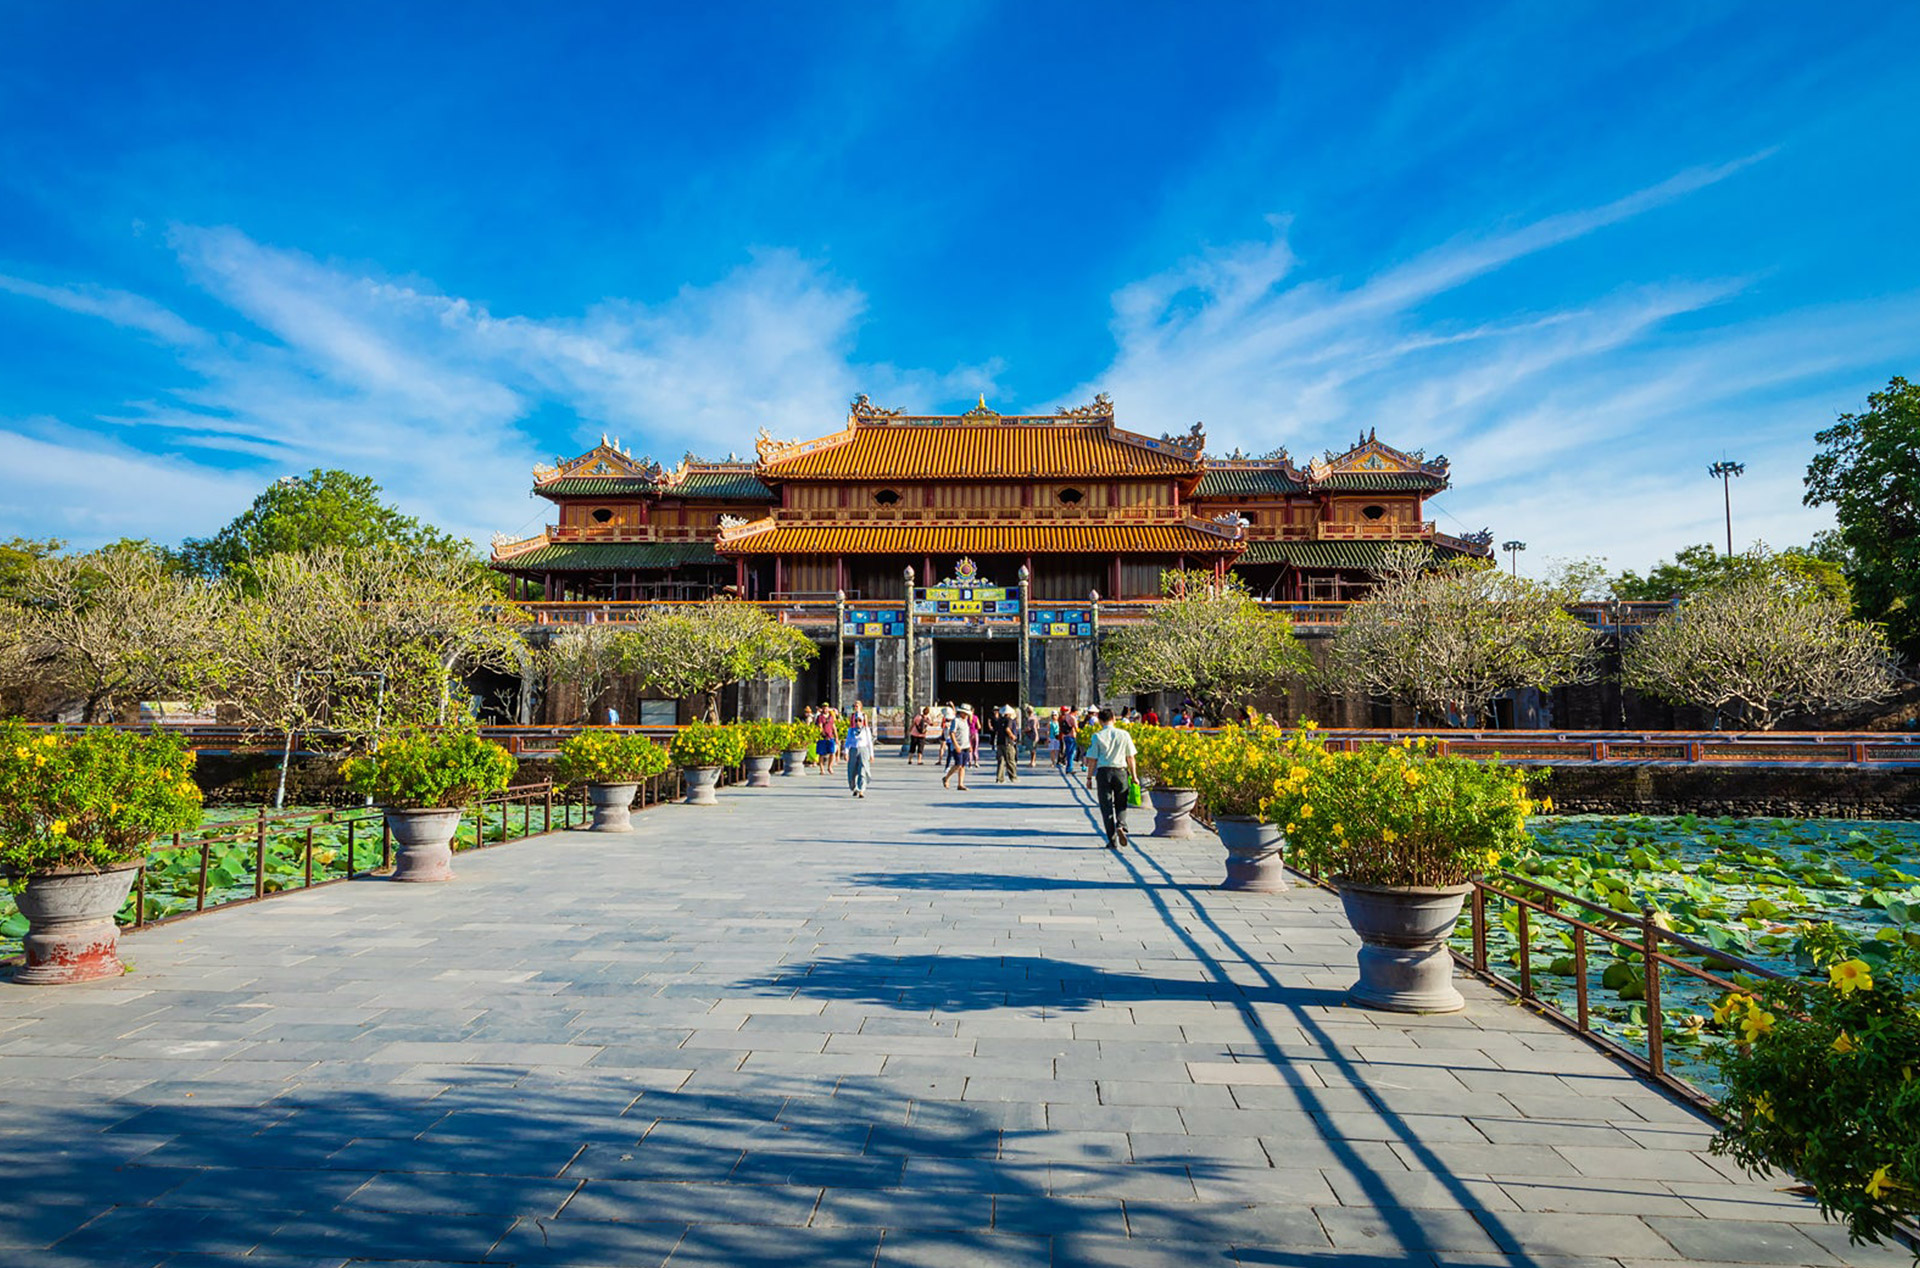 UNESCO World Heritage Site, The Imperial City of Hue